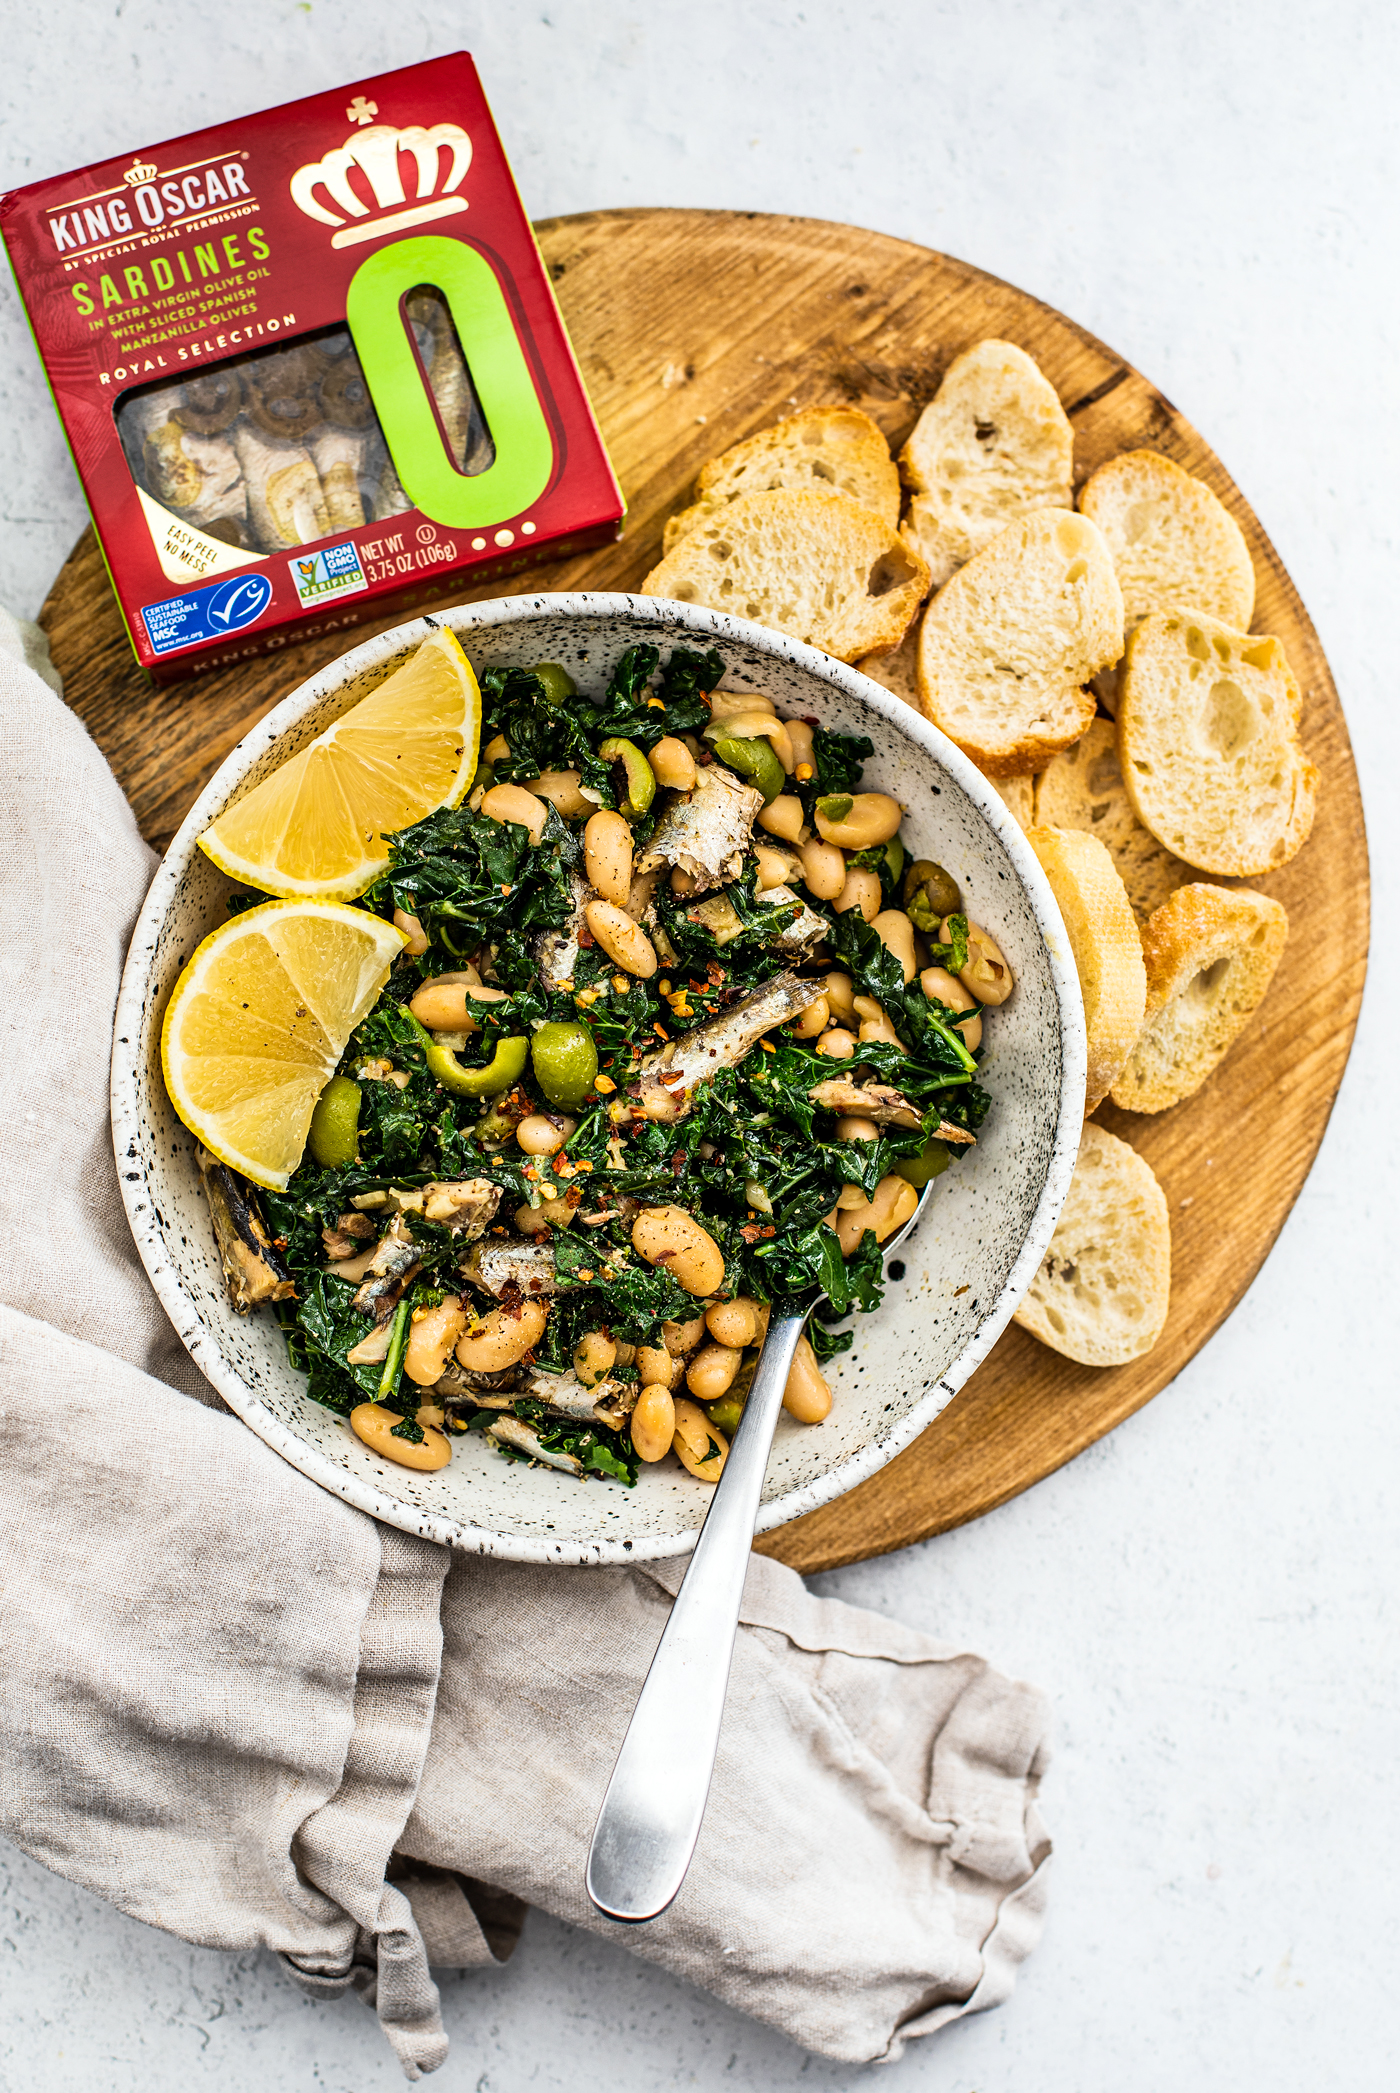 Serving board with bowl of greens and beans, toasted baguette slices, and a package of King Oscar sardines.